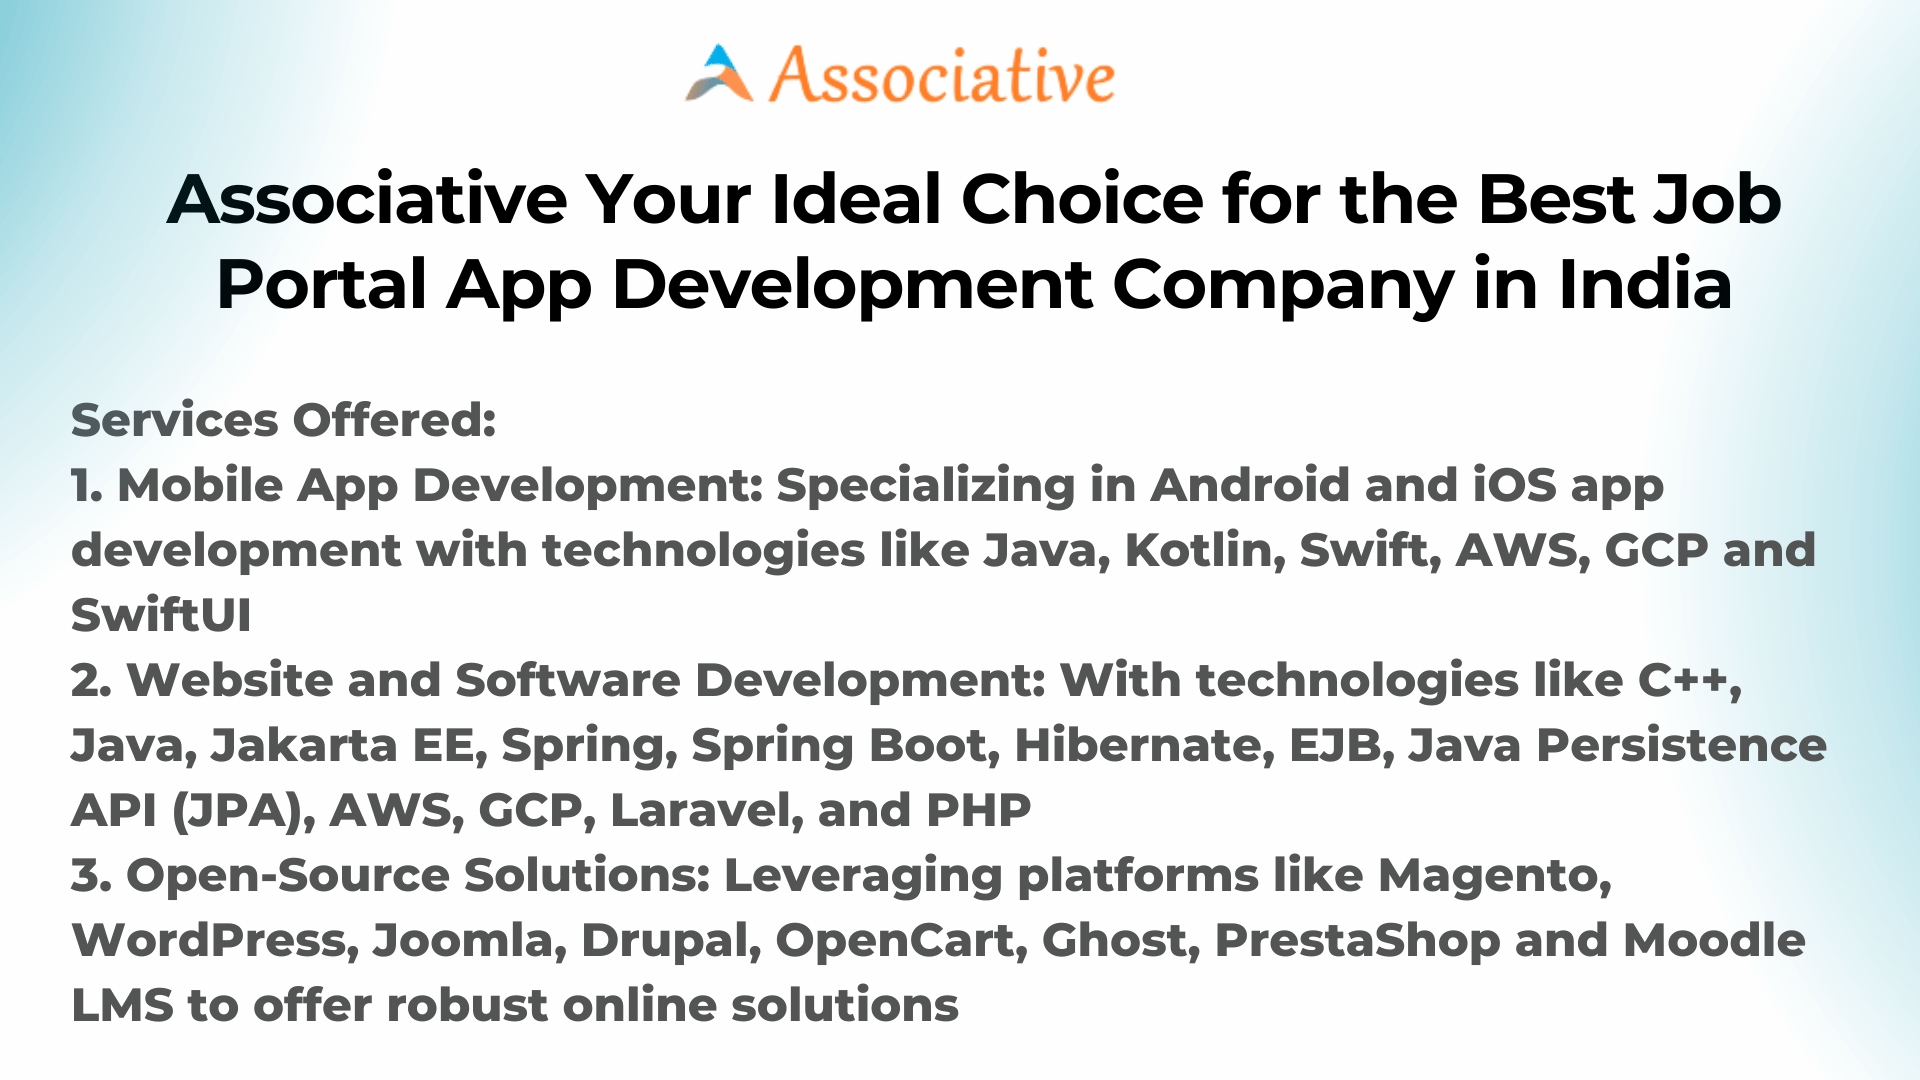 Associative Your Ideal Choice for the Best Job Portal App Development Company in India